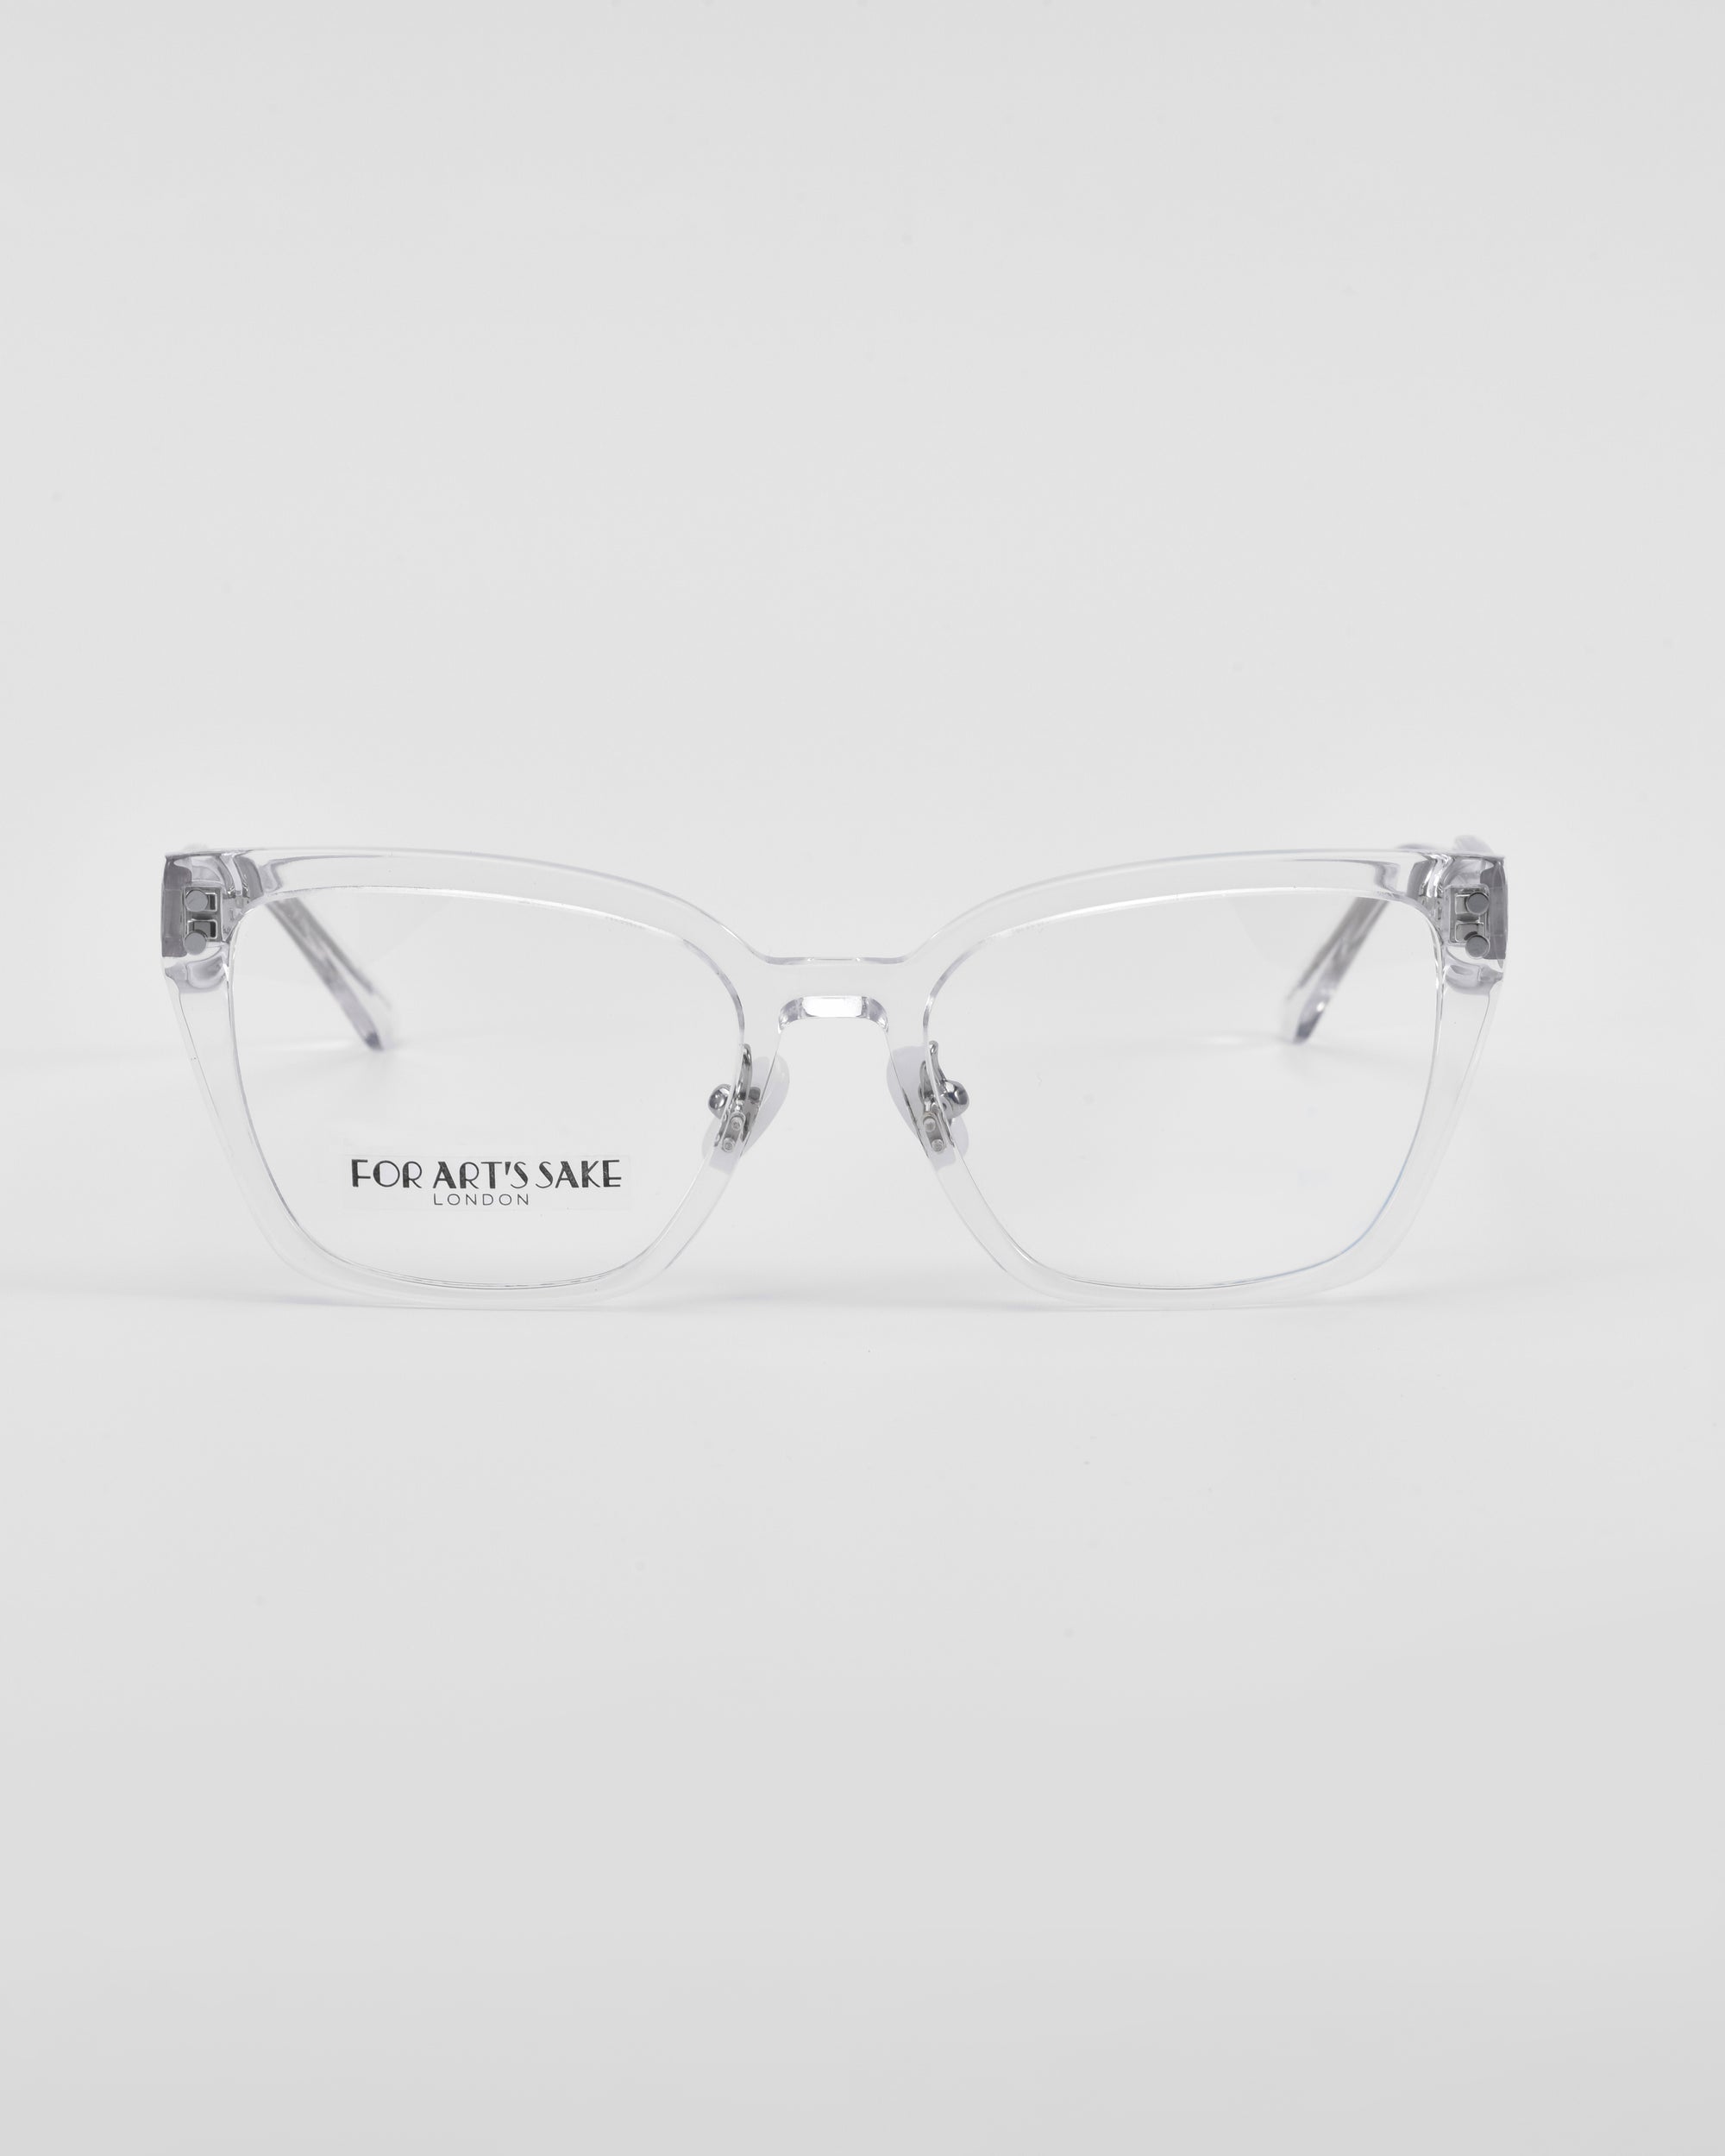 A pair of transparent prescription glasses with a minimalist design, rectangular lenses, and "For Art's Sake®" printed on the left lens. Featuring 18-karat gold-plated accents for an exquisite touch. The background is plain white.